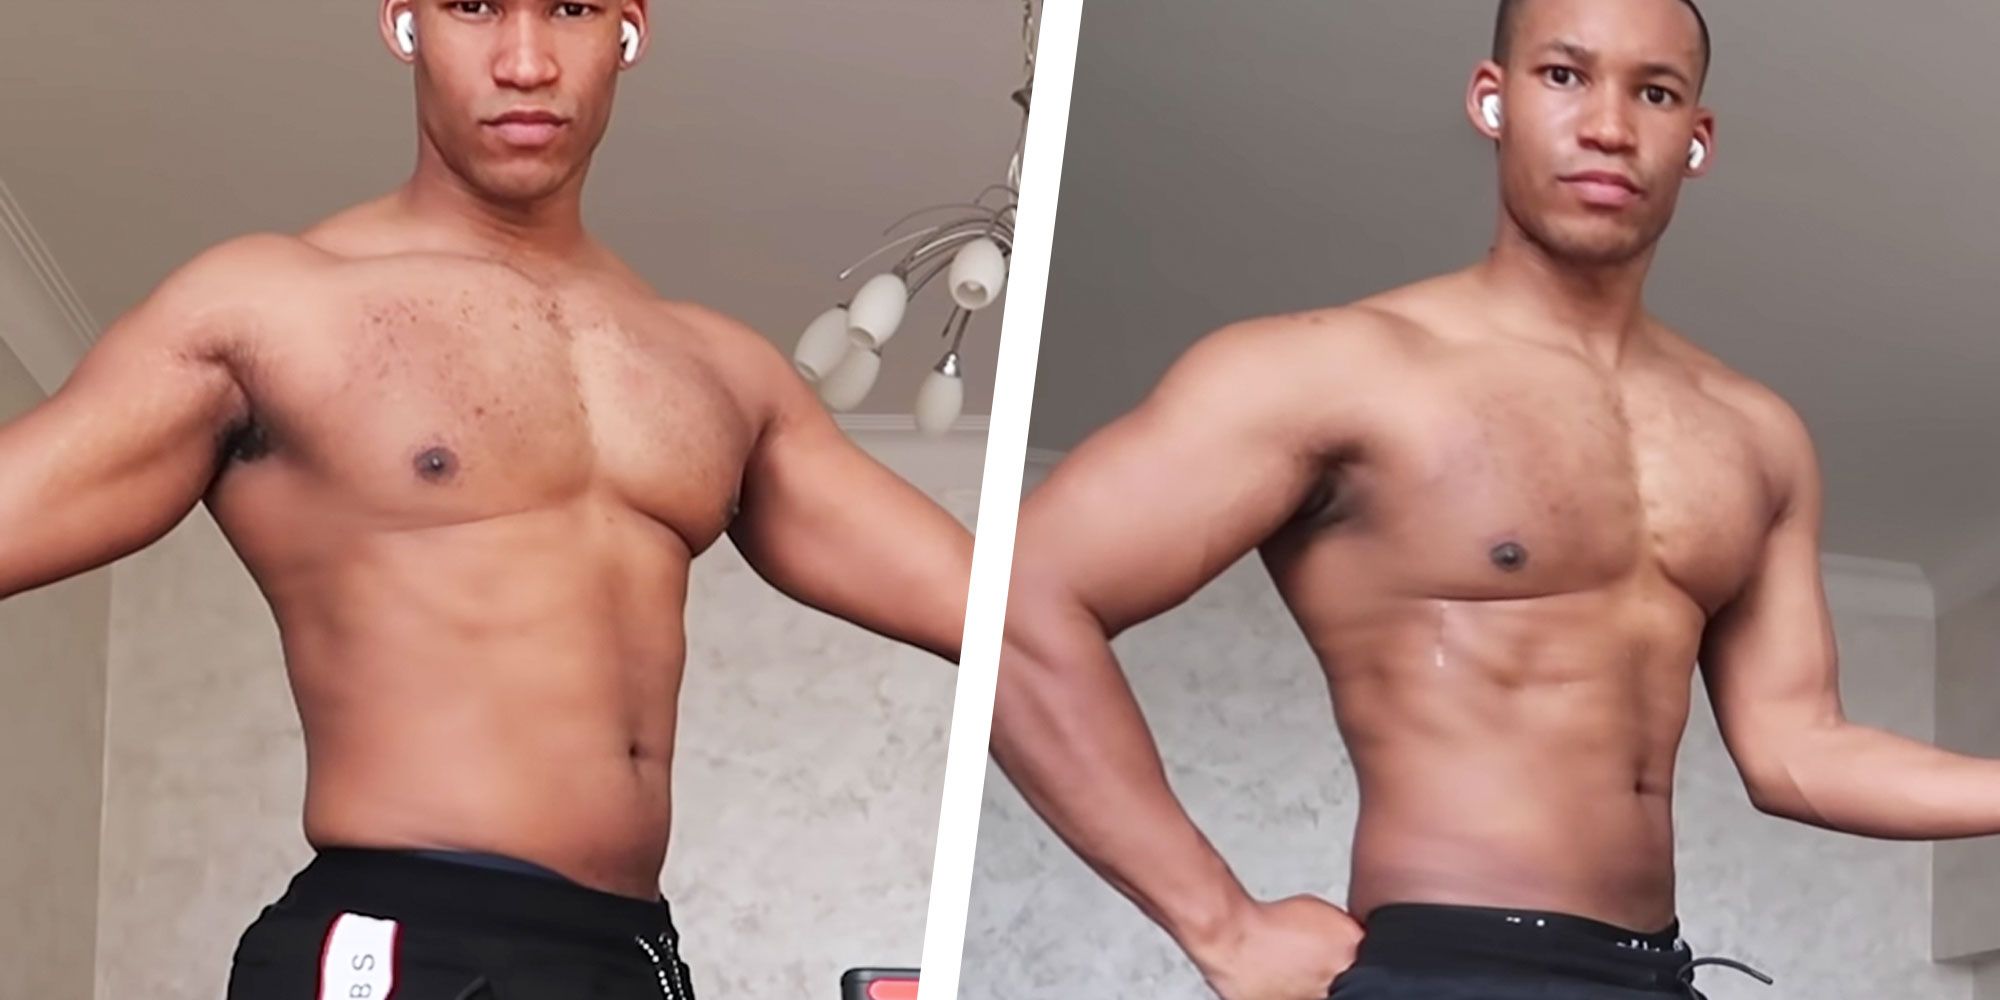 Running and Weights Helped This Man Get Shredded in 5 Months